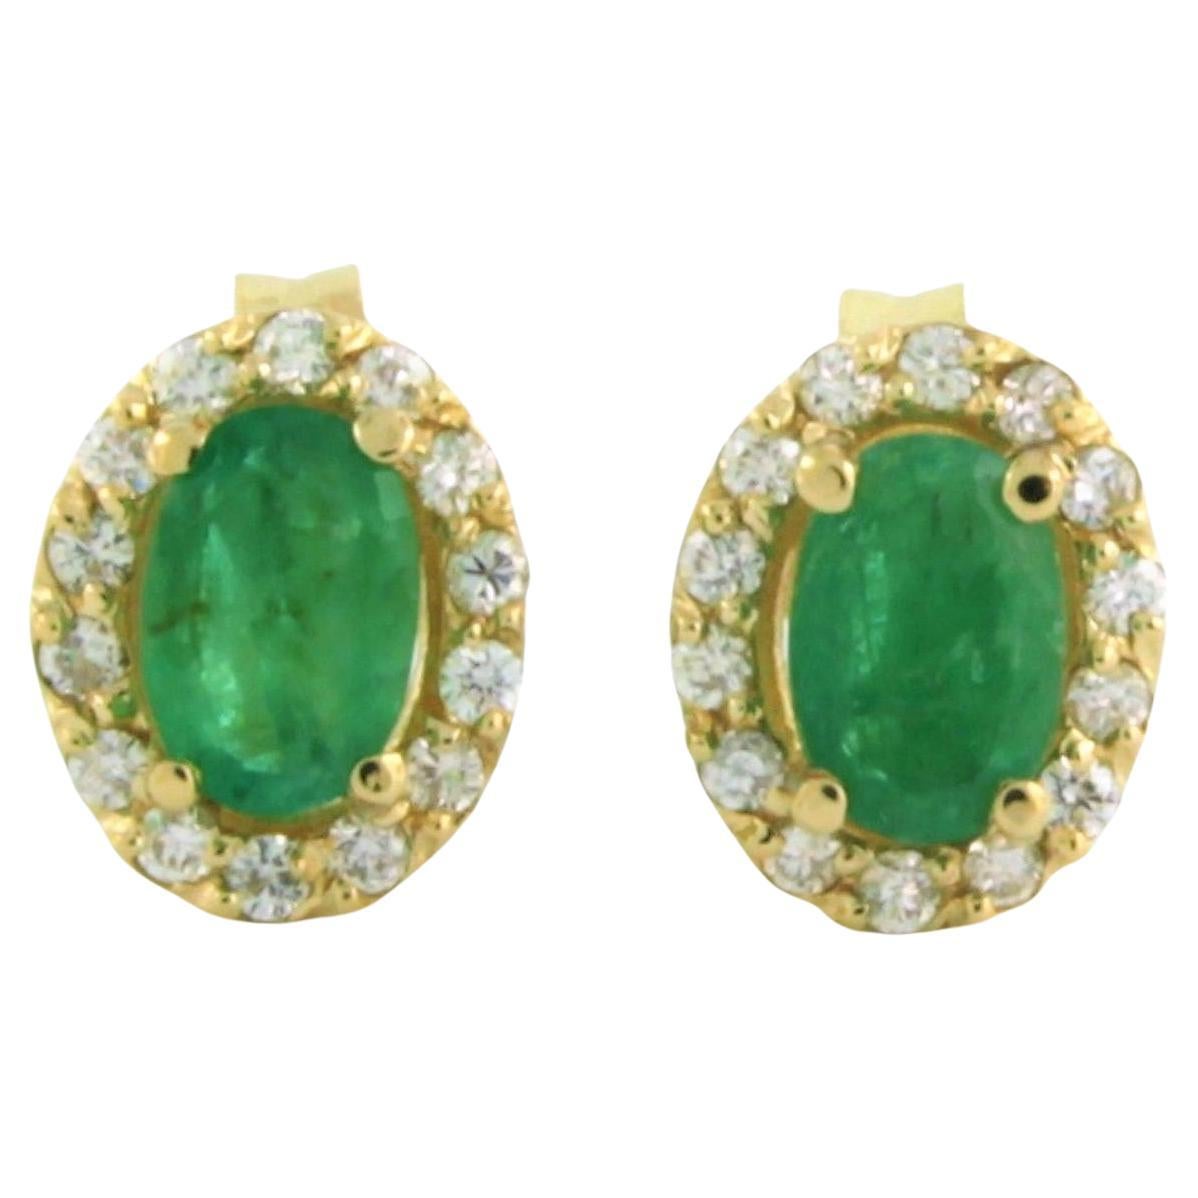 Cluster earrings studs set with emerald and diamonds 14k yellow gold For Sale